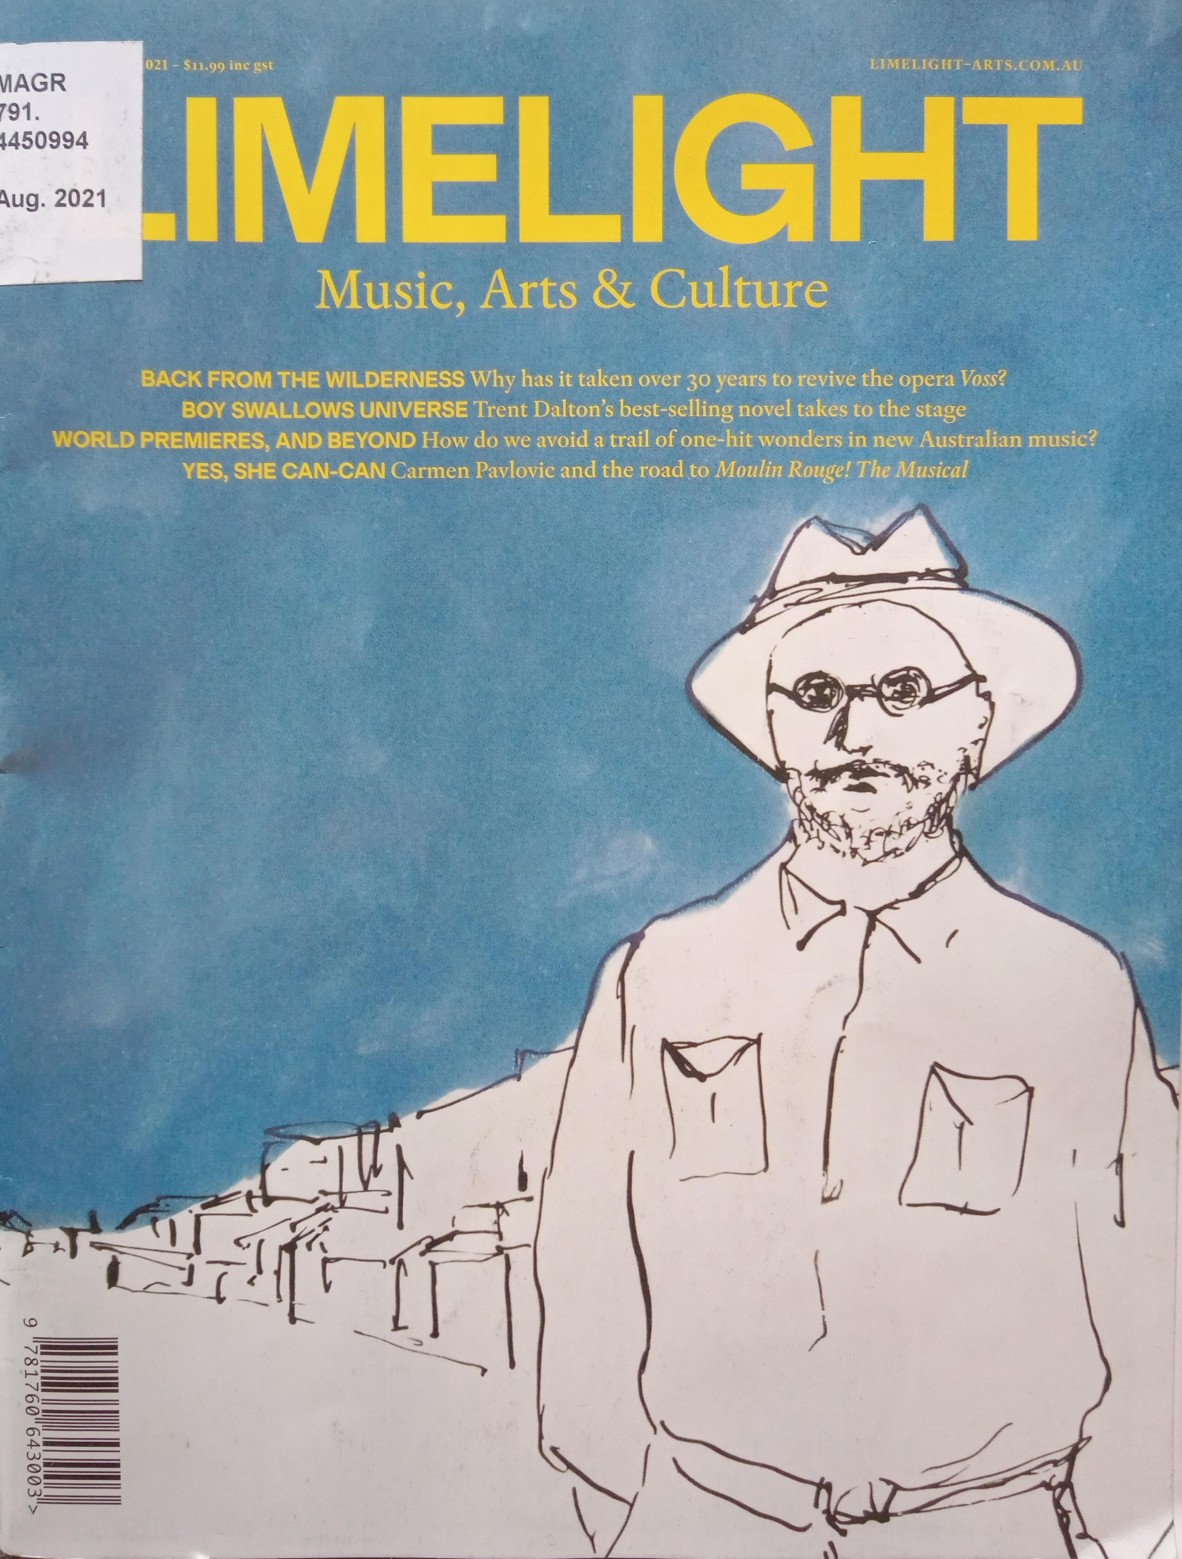 Front cover of Limelight magazine with line drawing of a man August 2021